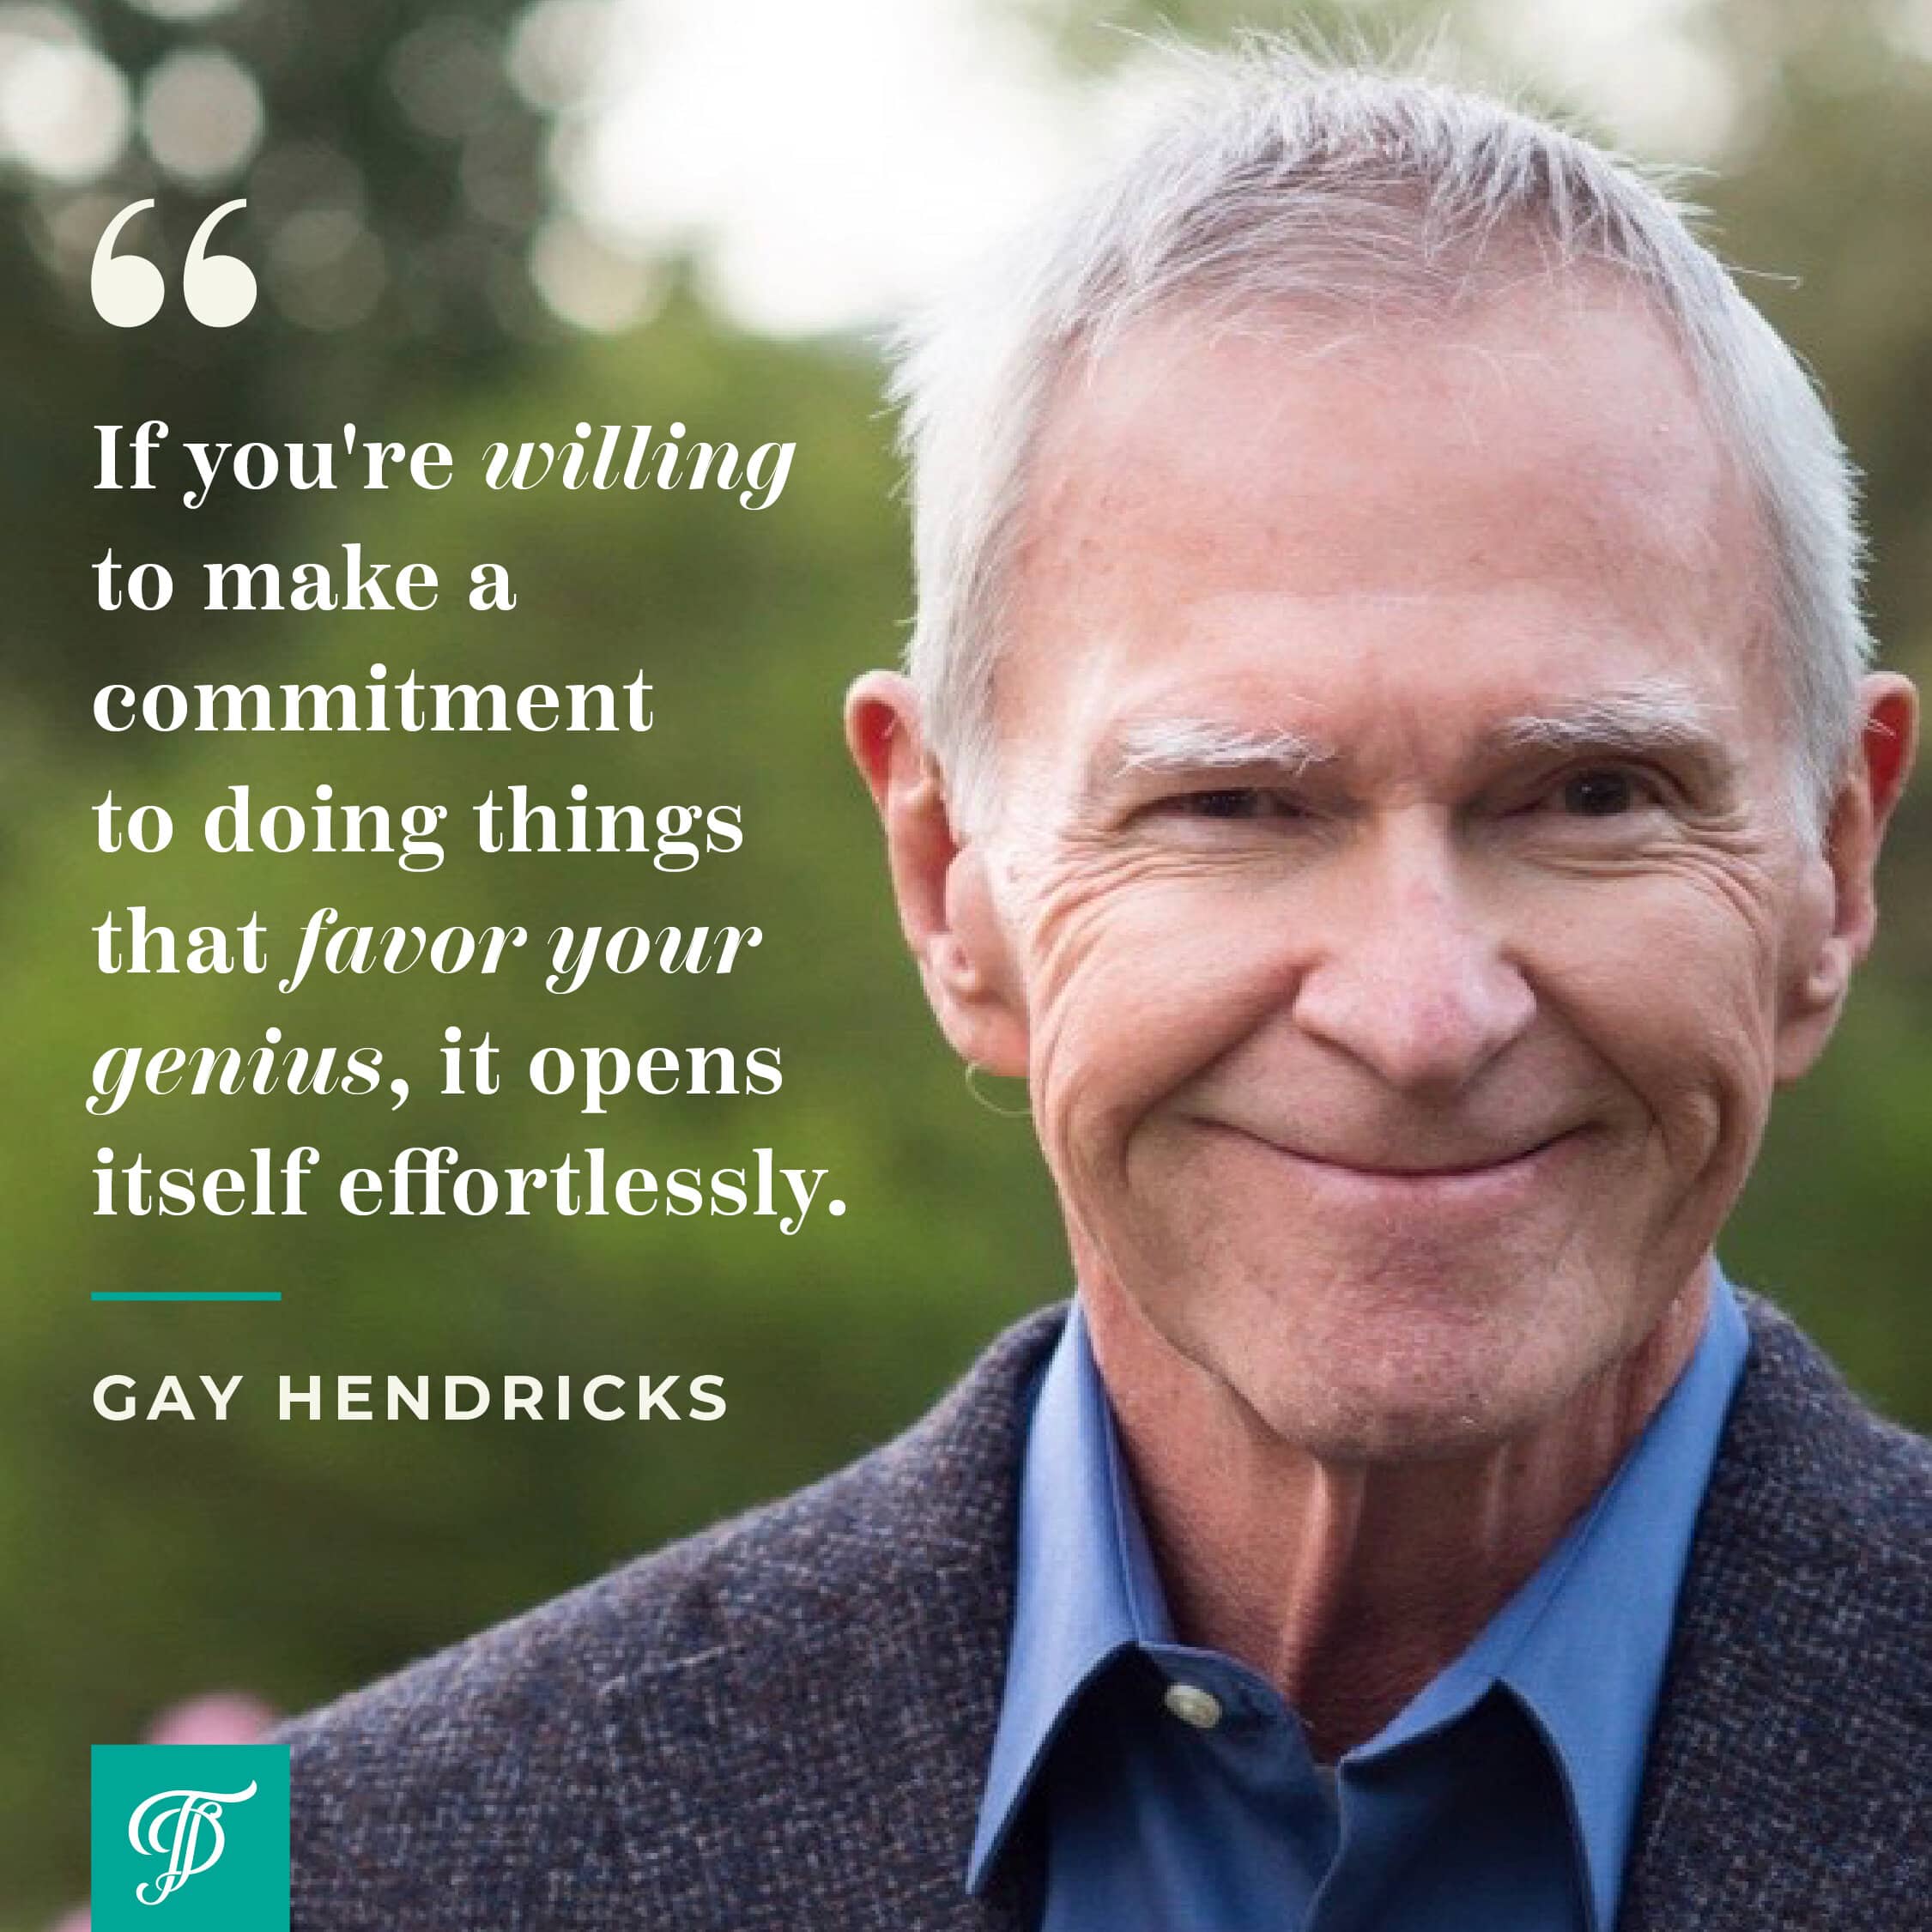 Gay Hendricks, author of the Big Leap podcast interview on The Intentional Advantage